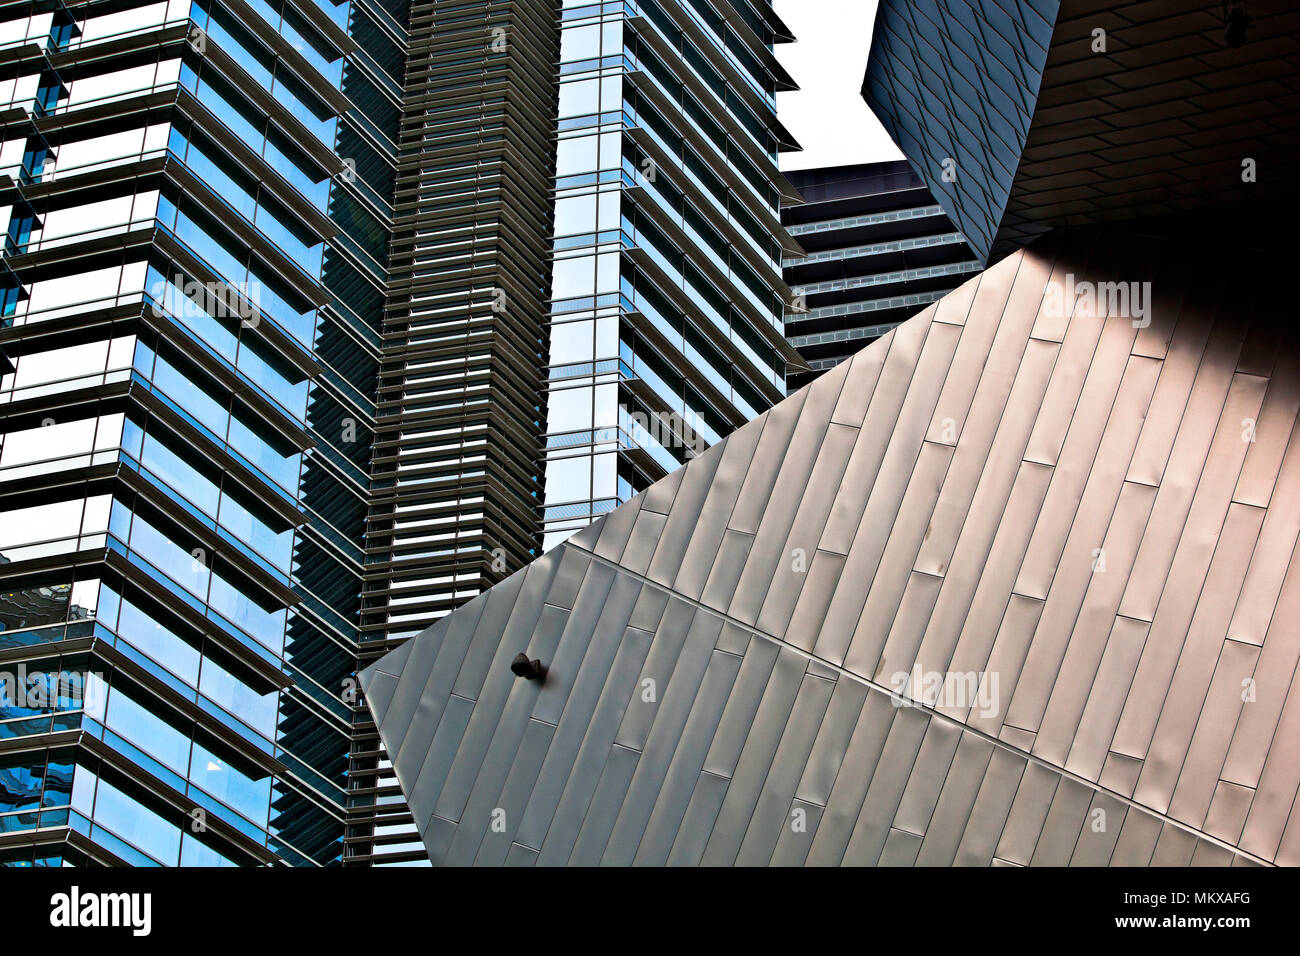 Striking glass and steel contemporary architecture at city center and the aria resort, Las Vegas Nevada USA Stock Photo